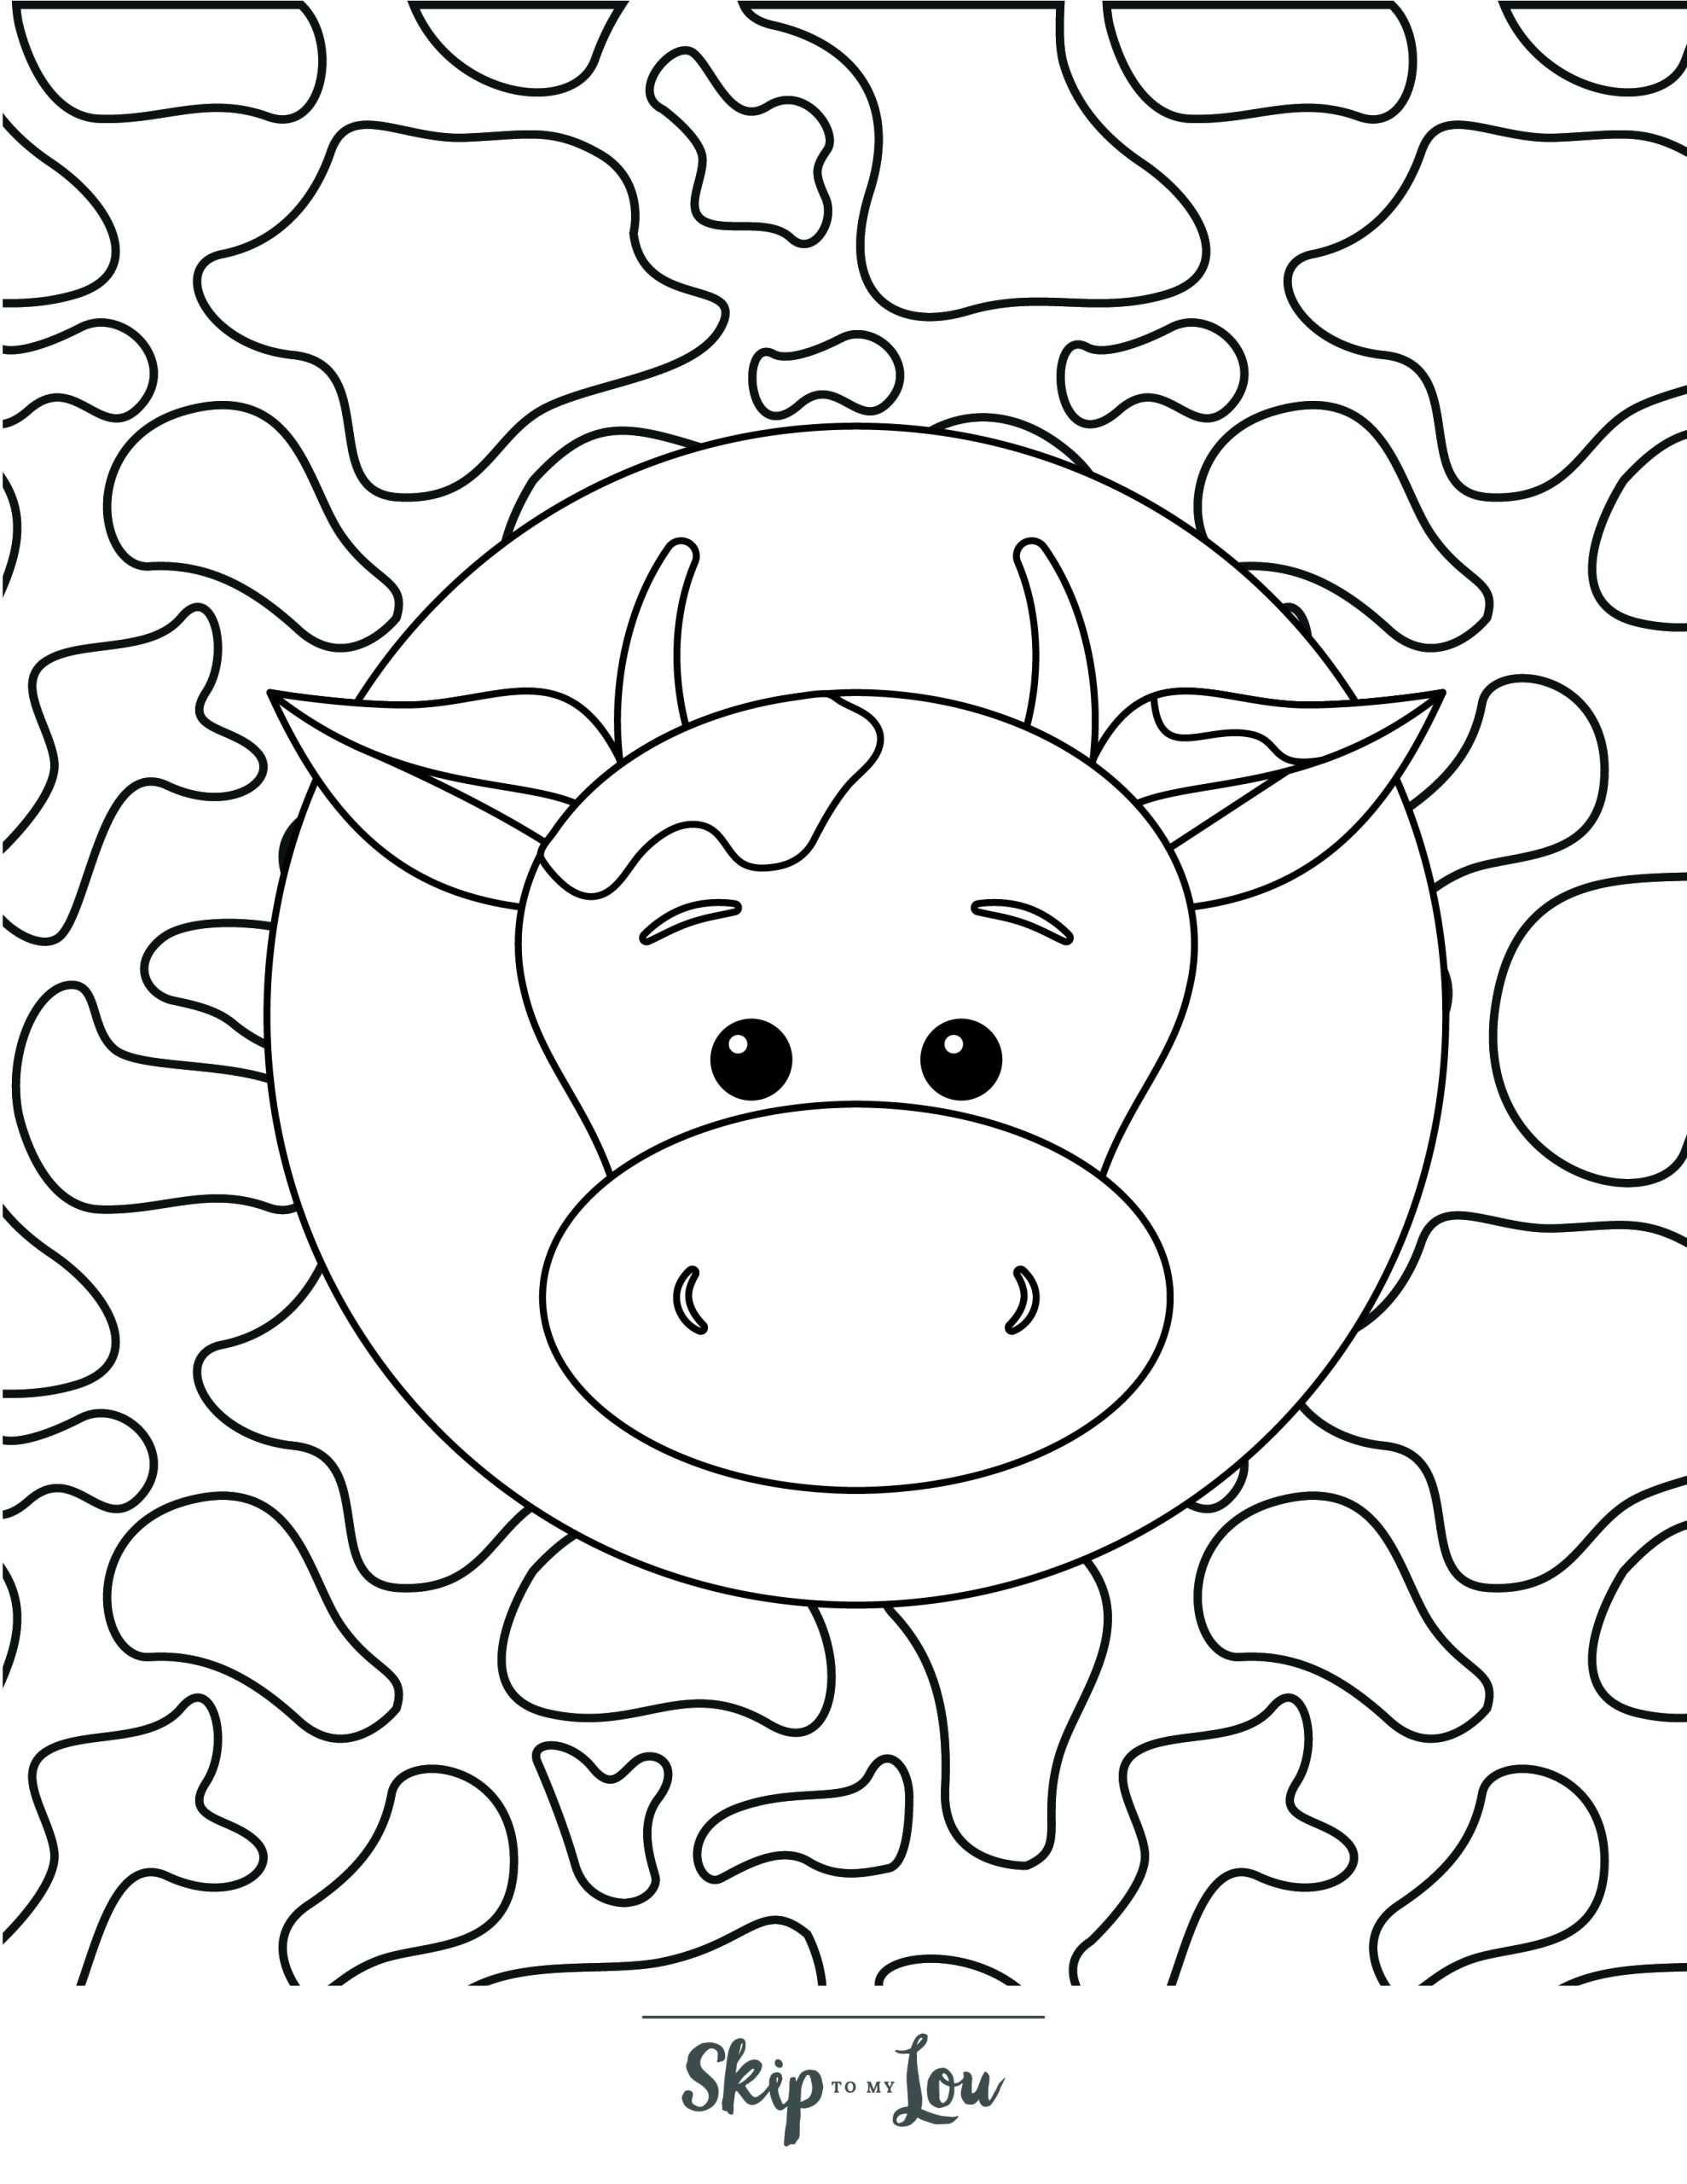 Free printable cow coloring pages with pdf download skip to my lou